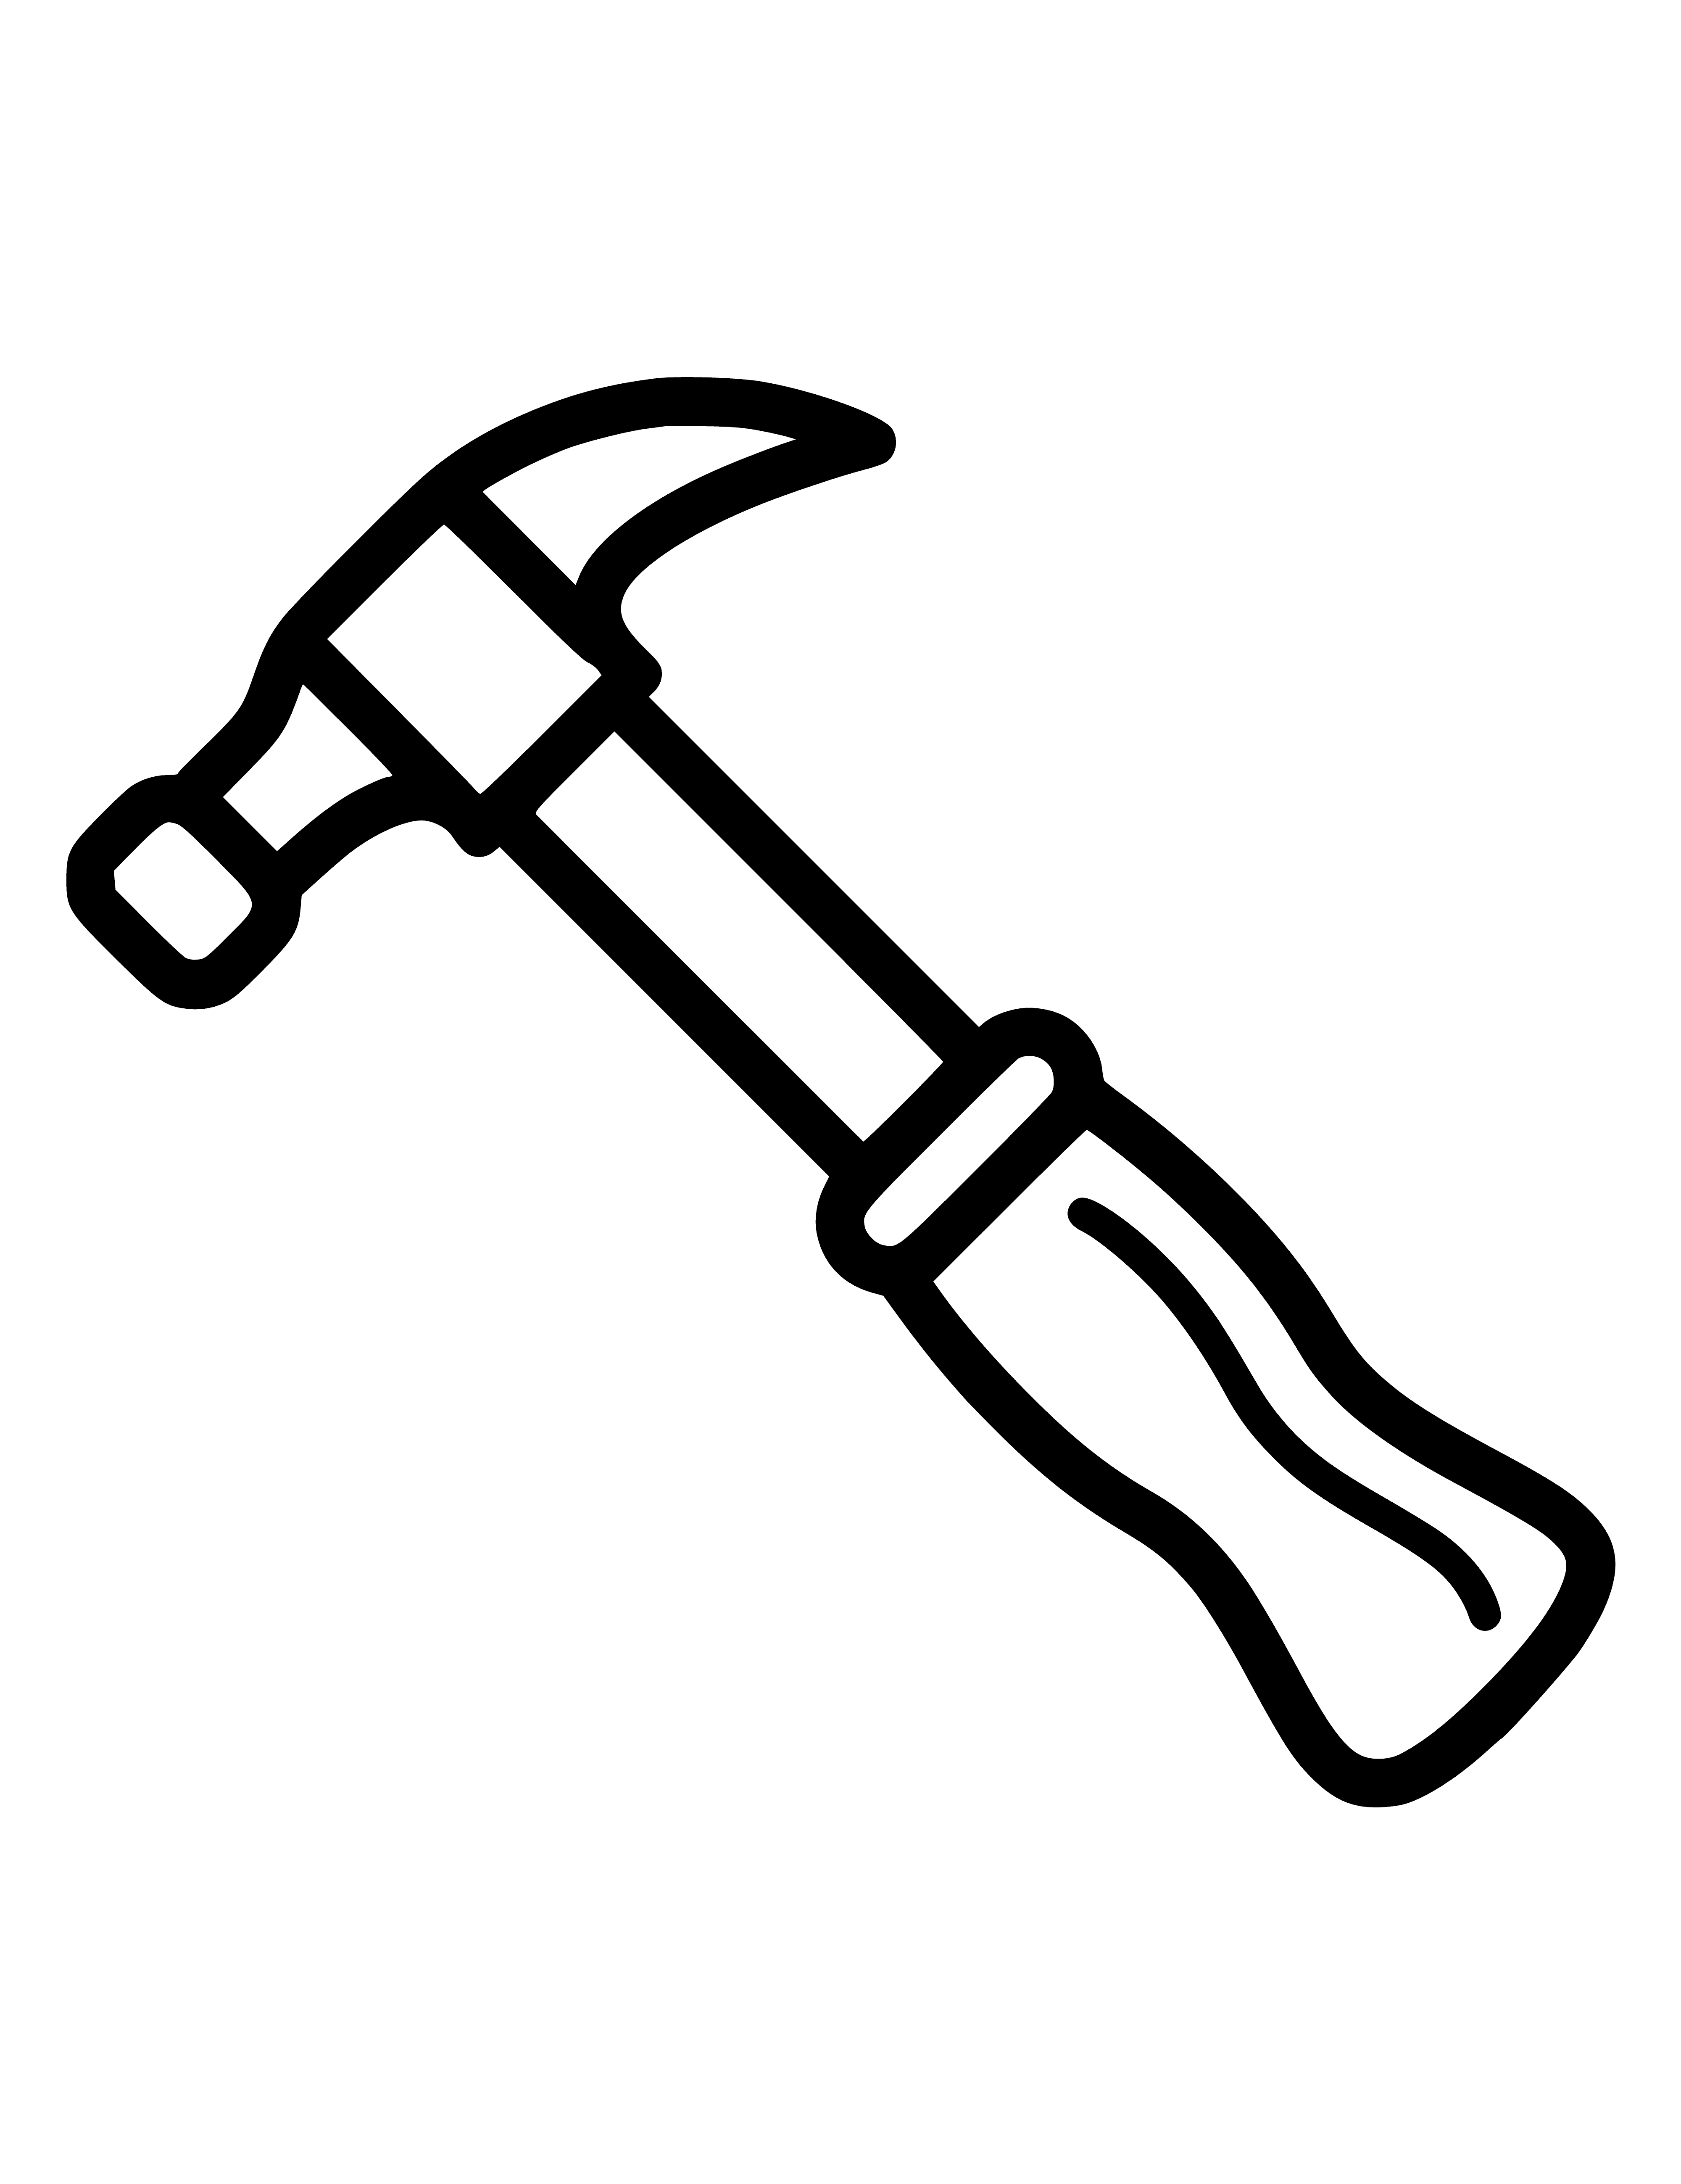 coloring page: A hammer made of metal with a wooden handle and round head with a flat surface and a hole in the middle. Handle is cylindrical with a smooth surface.